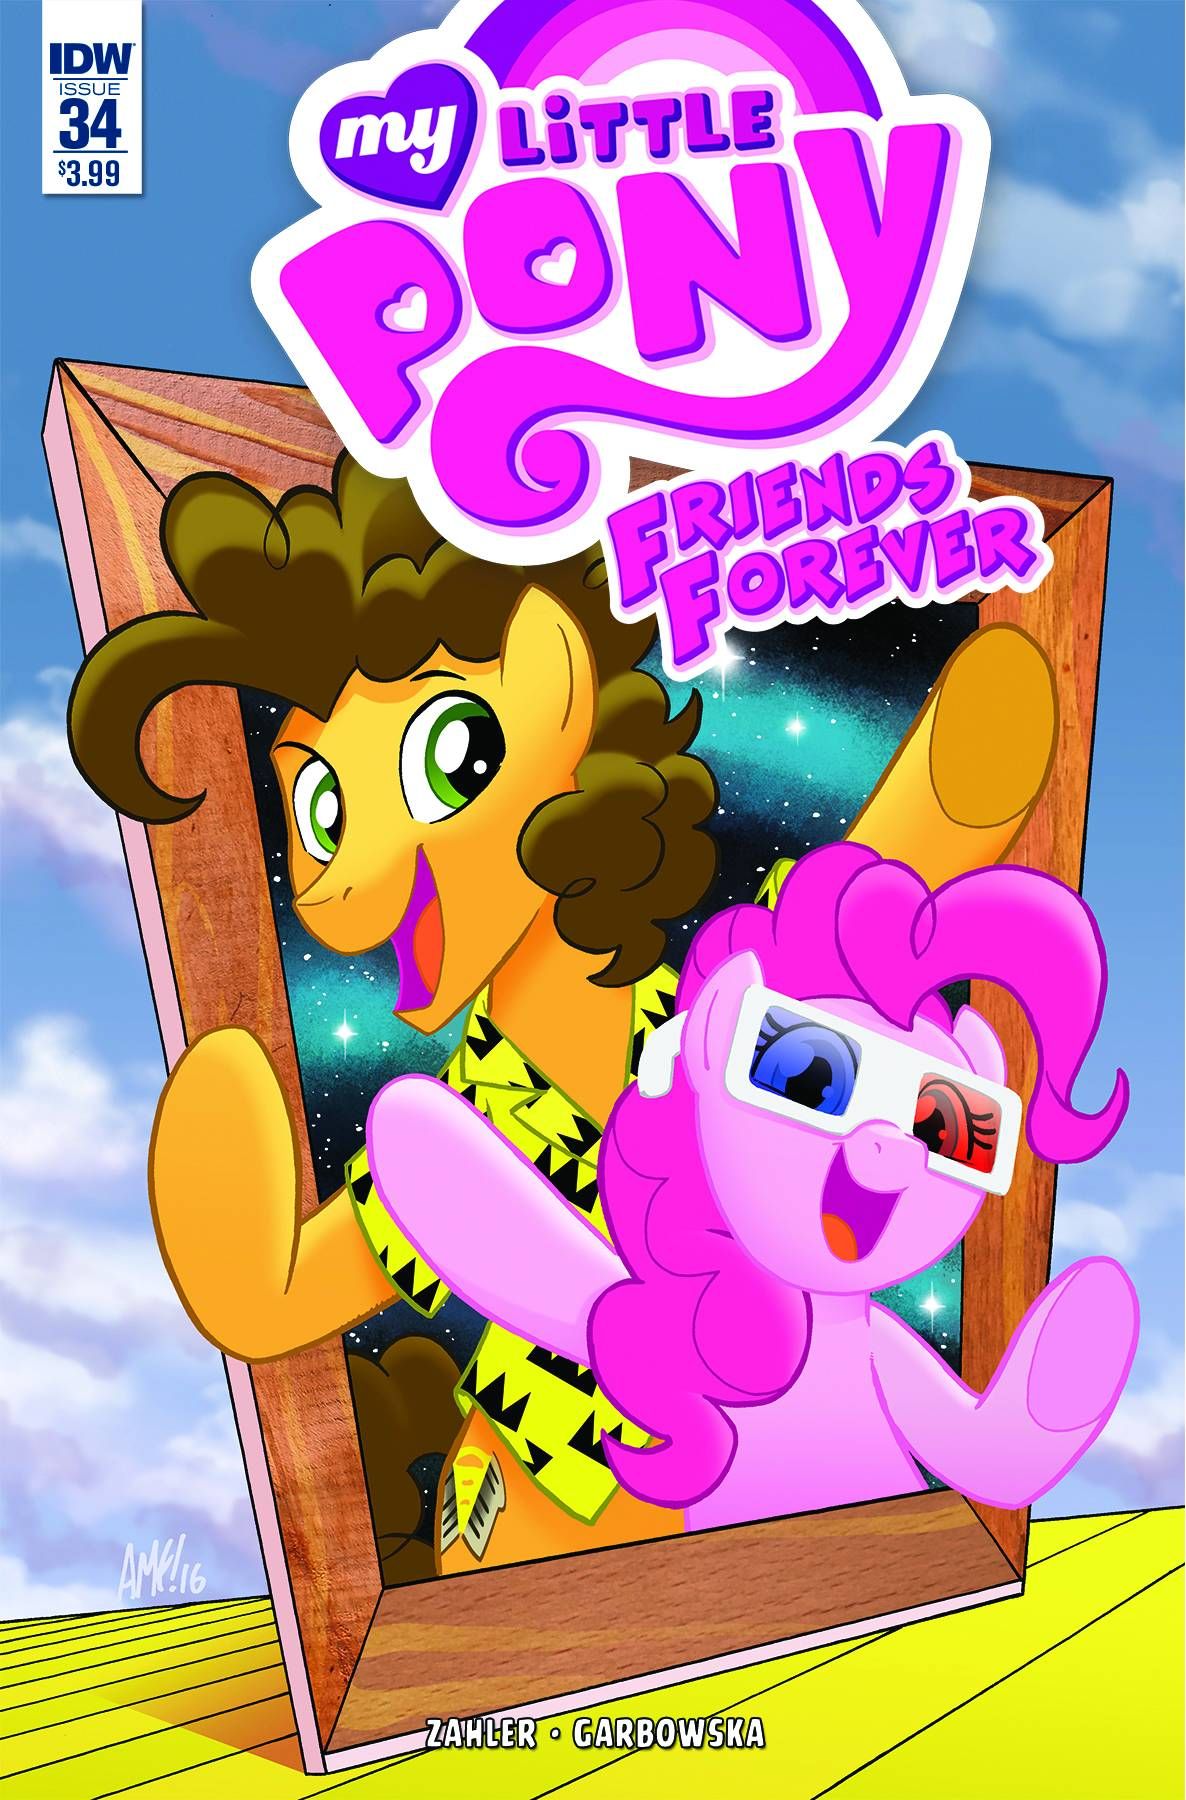 My Little Pony Friends Forever #34 Comic